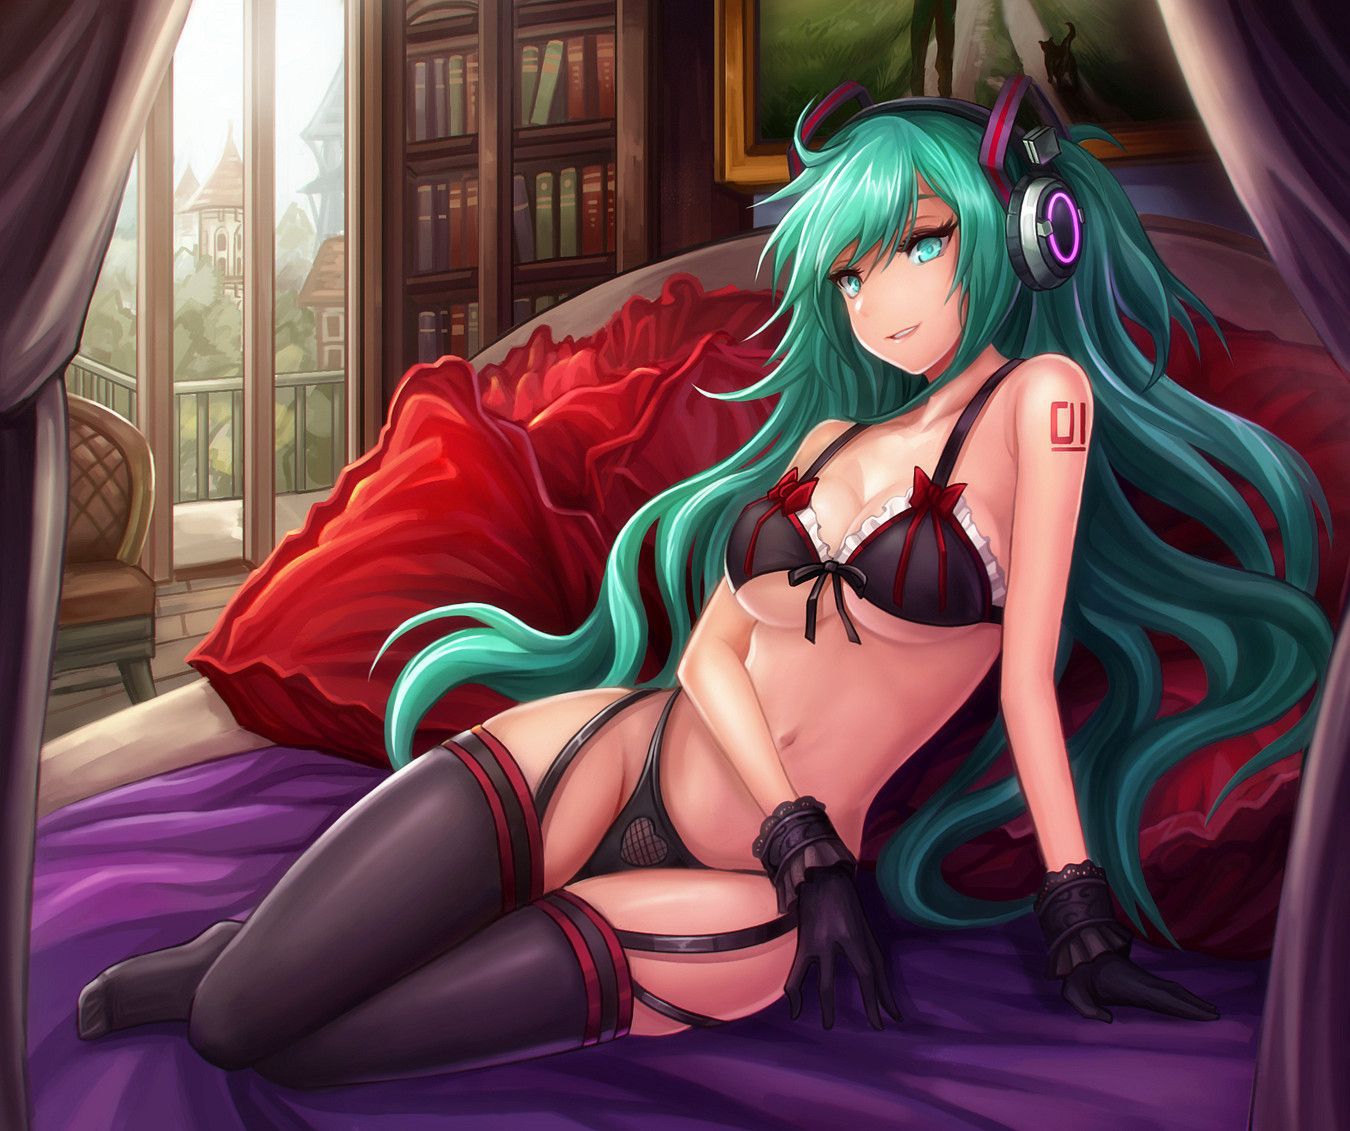 Healing Green! Secondary erotic pictures of girls with green hair wwww that 12 13